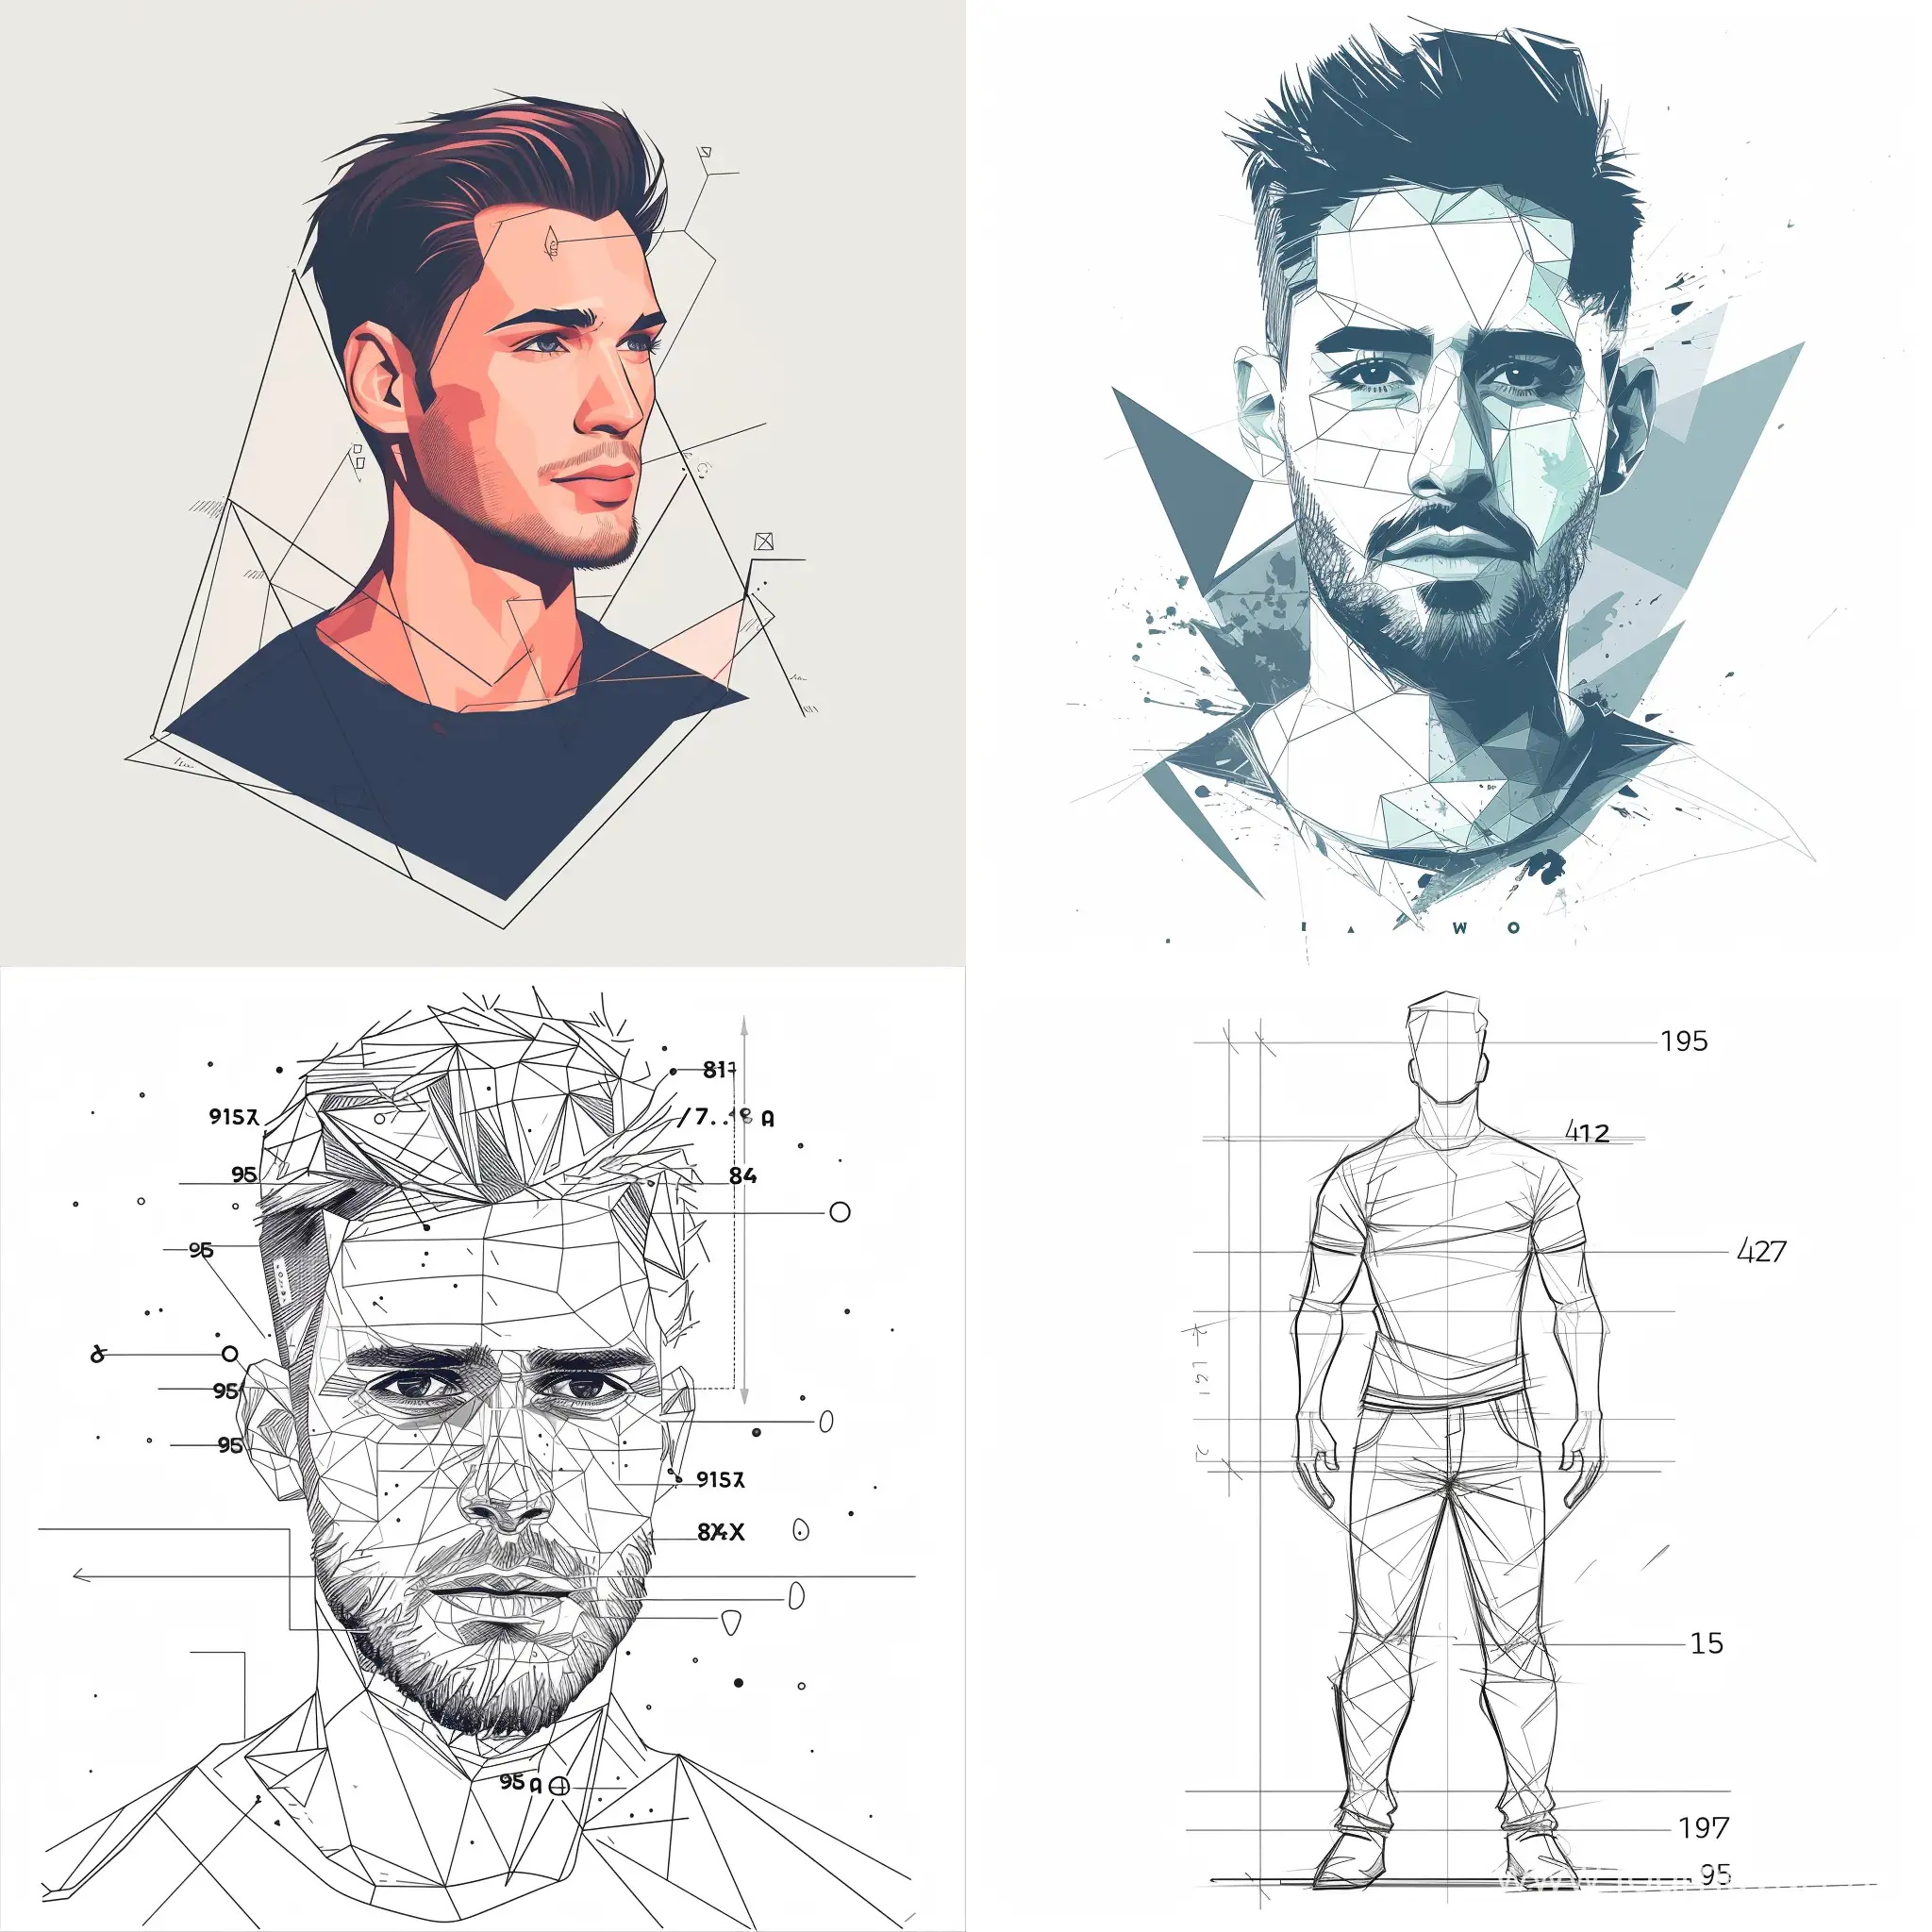 Geometric-Avatar-for-Social-Network-95kg-Man-with-Numeric-Elements